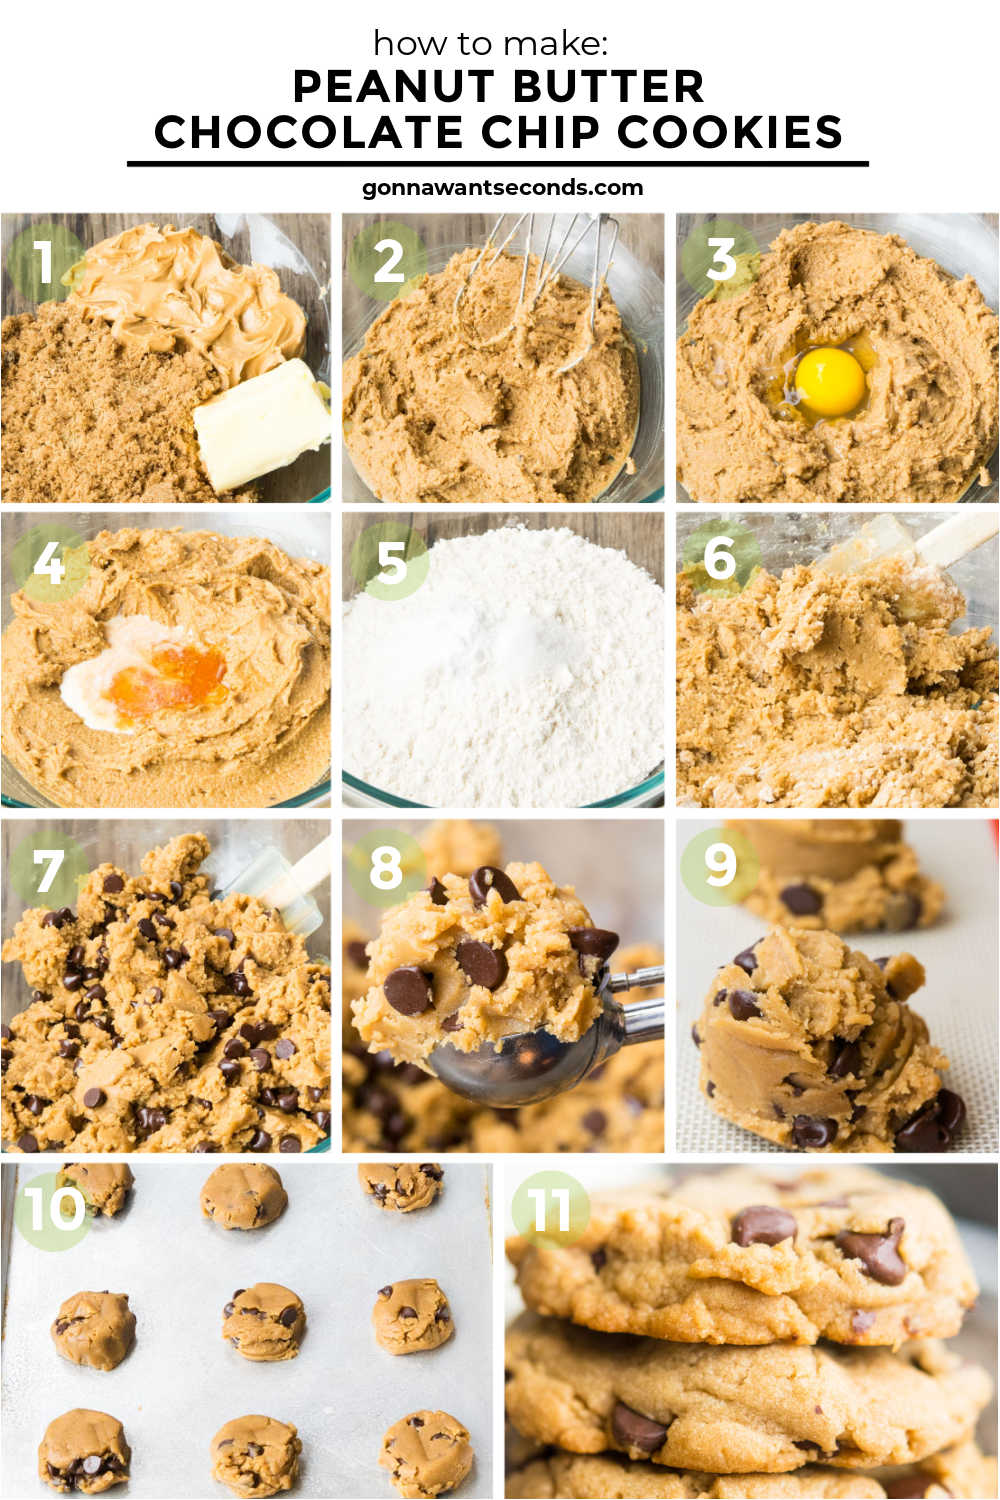 step by step how to make peanut butter chocolate chip cookies